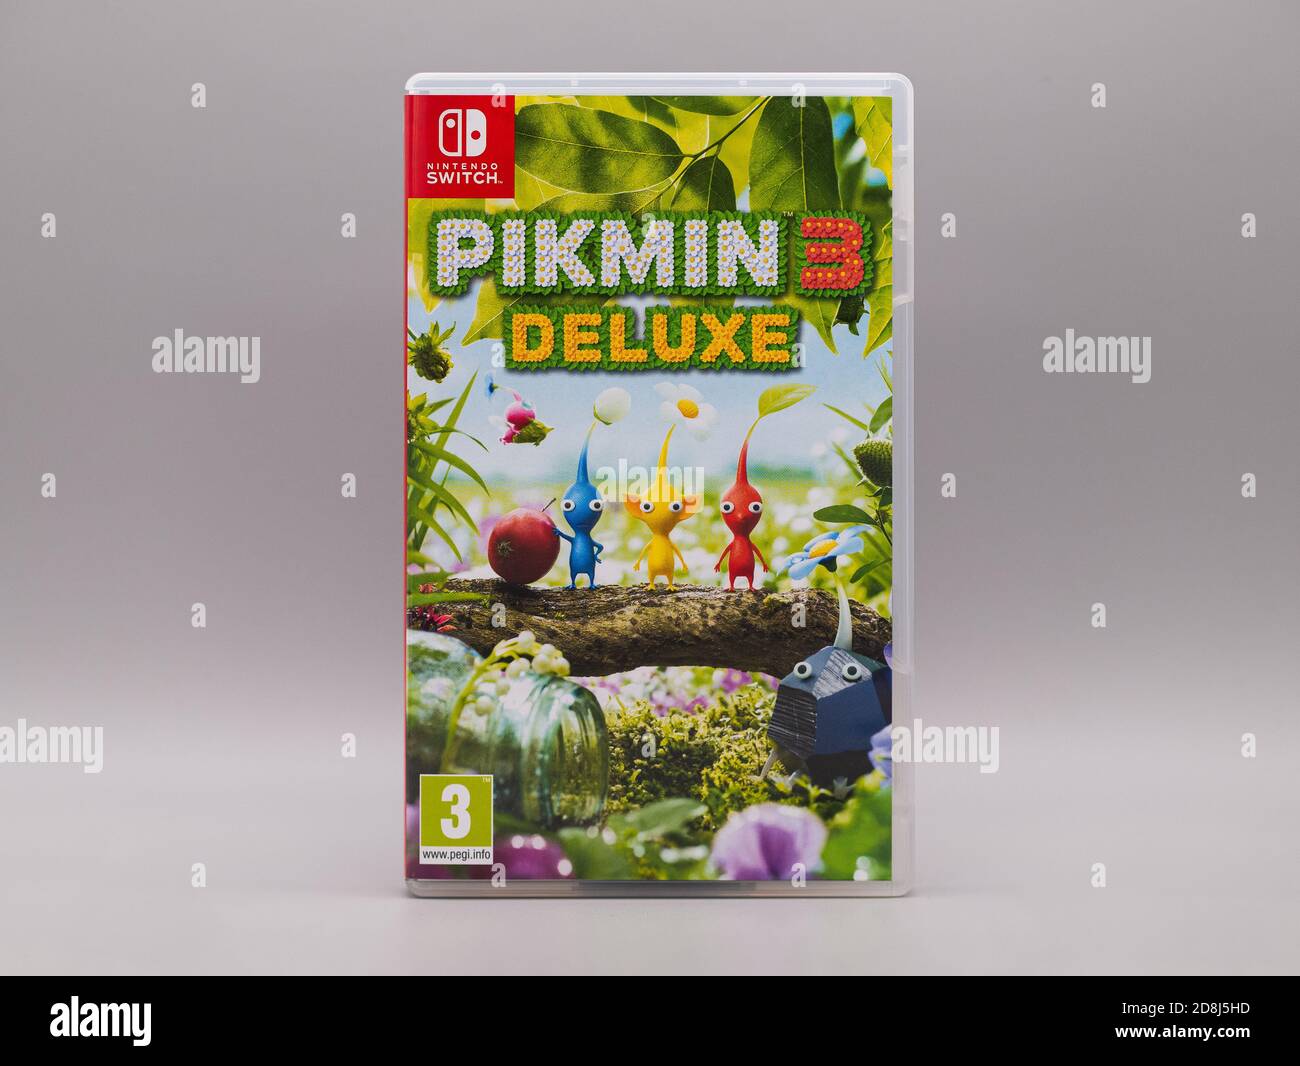 Oct 30th 2020, UK - Pikmin 3 Deluxe Nintendo Switch re-release game Stock  Photo - Alamy